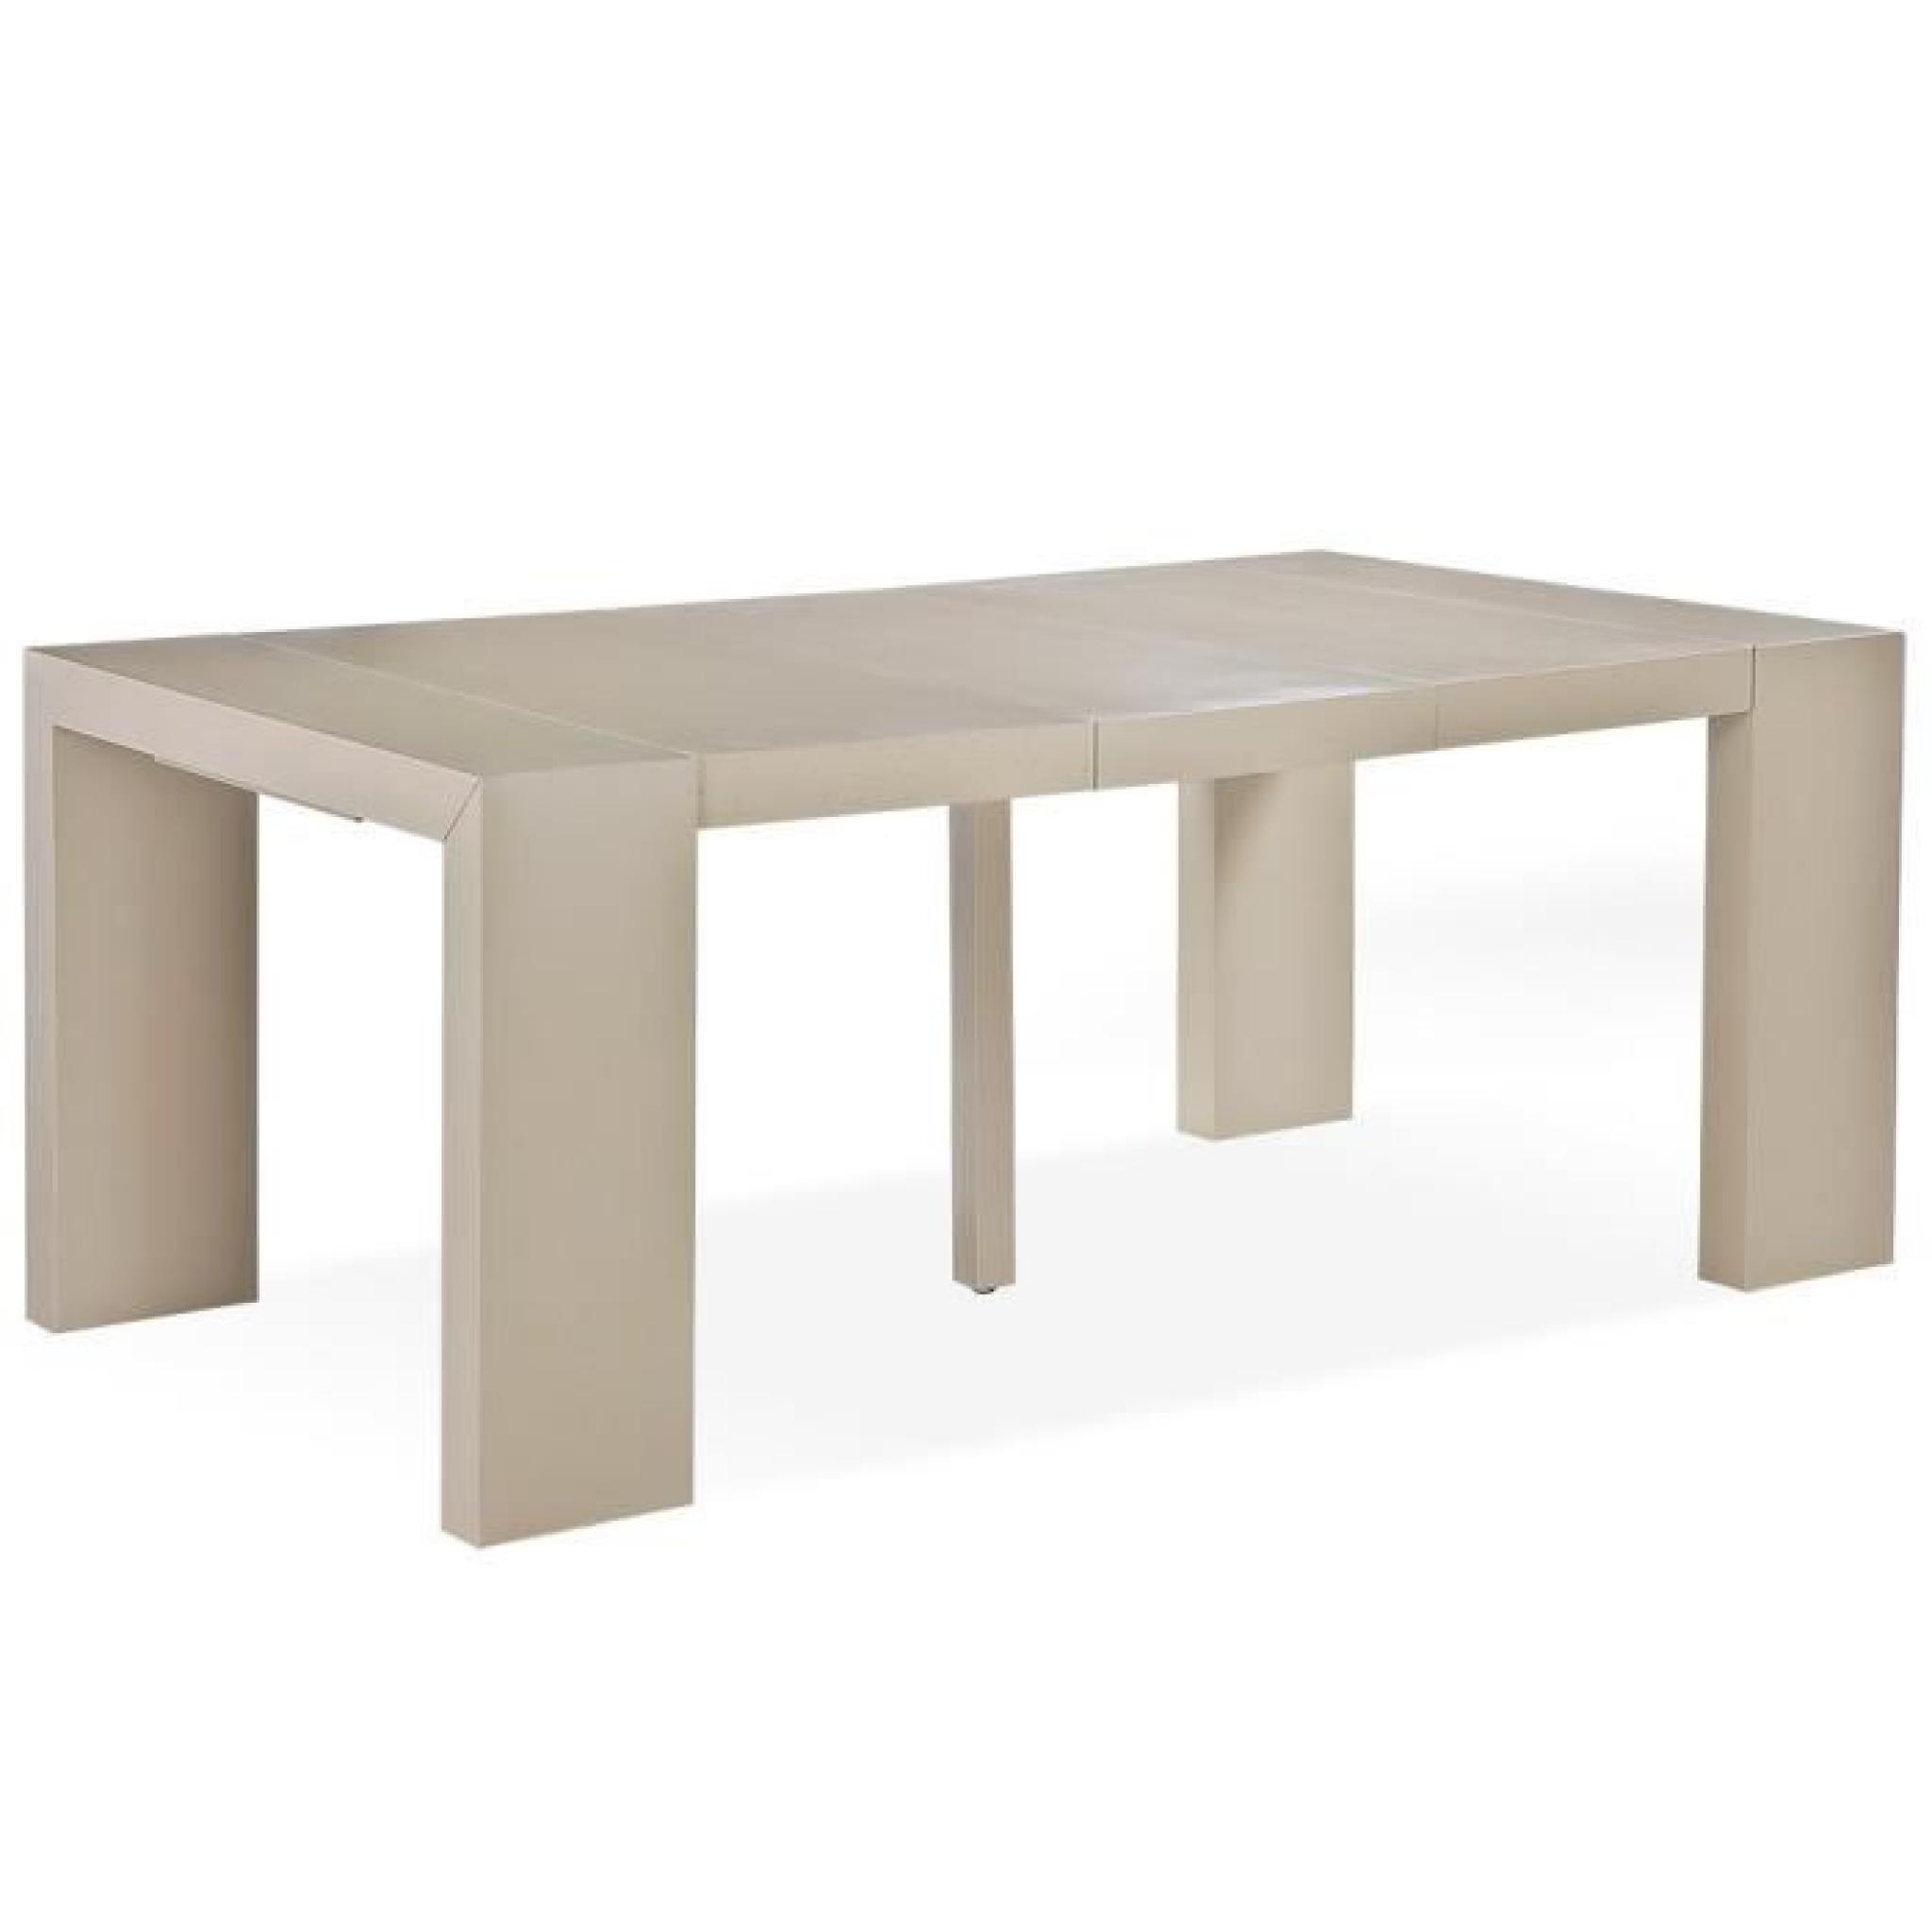 Table console Tango XL Taupe Clair pas cher